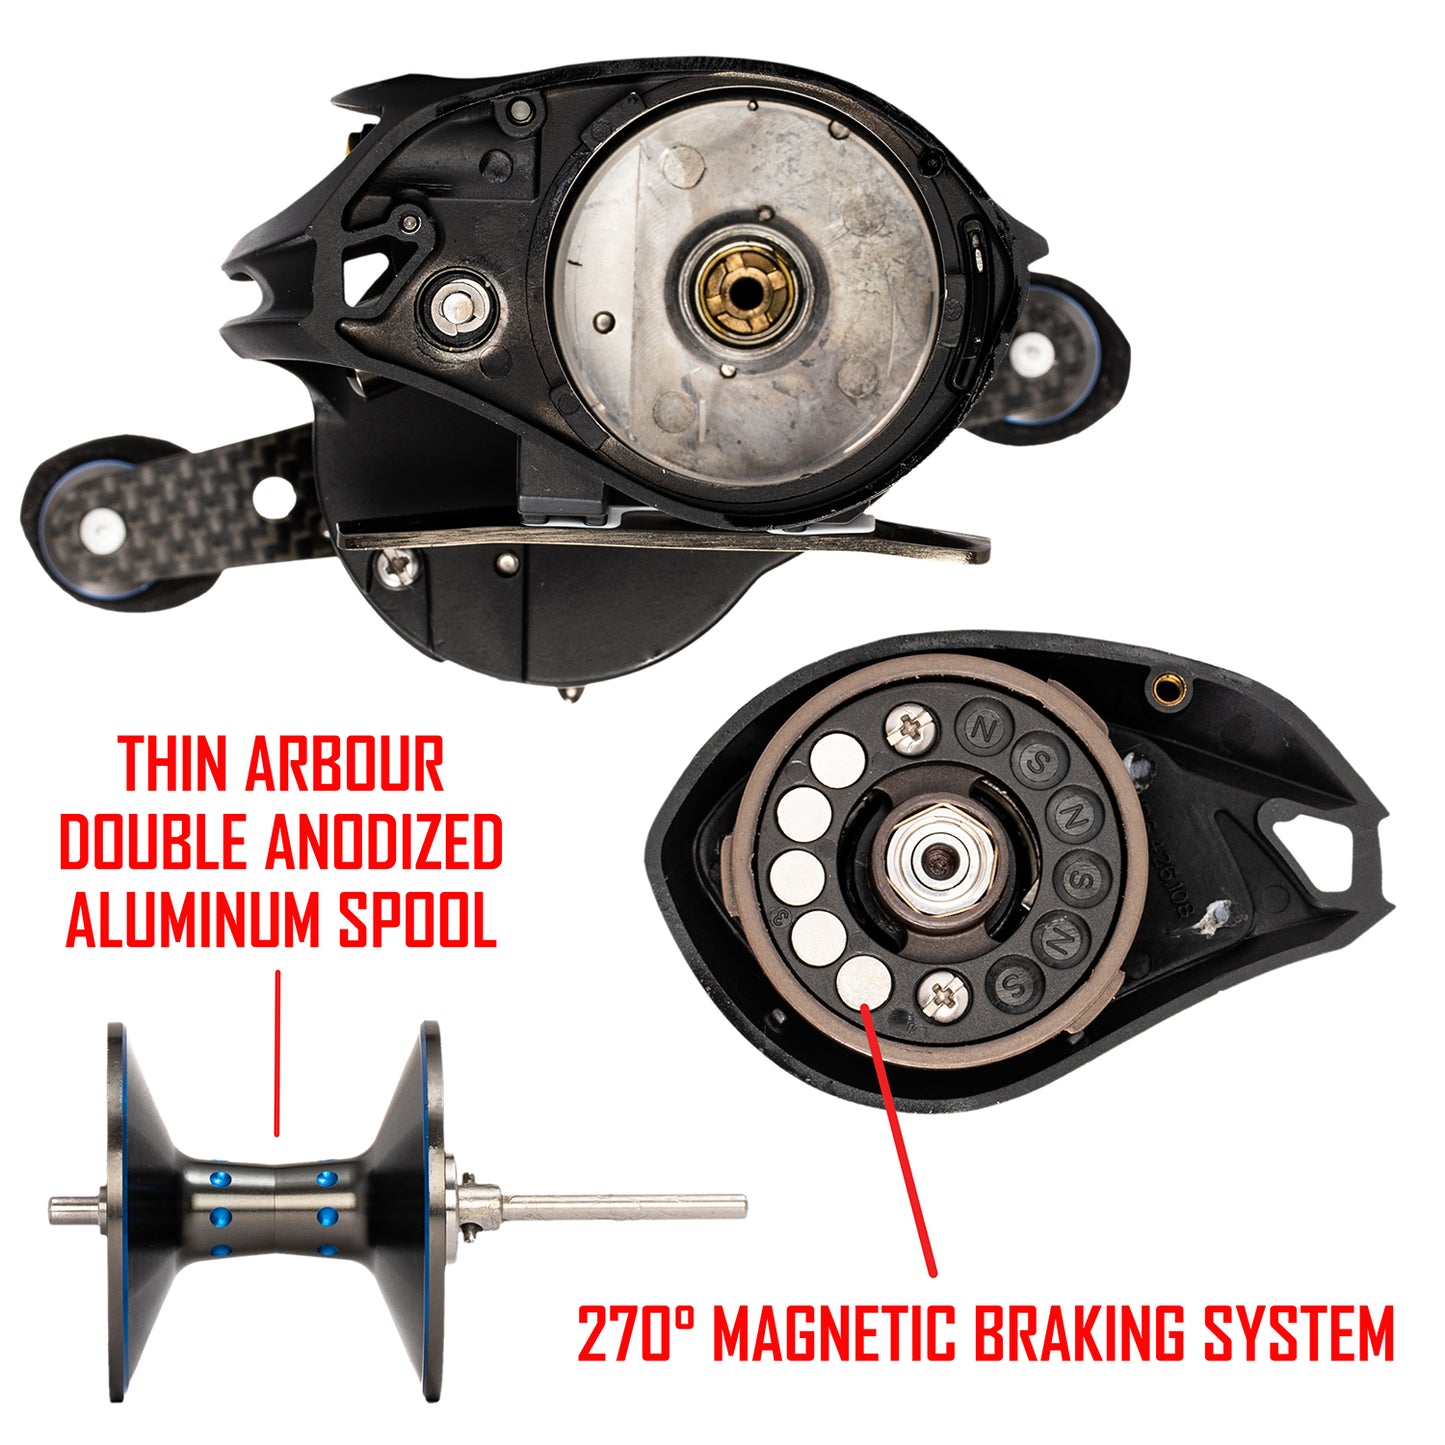 Black with blue APEX MAGNUM Baitcaster with red text. text: THIN ARBOUR DOUBLE ANODIZED ALUMINUM SPOOL 270° MAGNETIC BRAKING SYSTEM